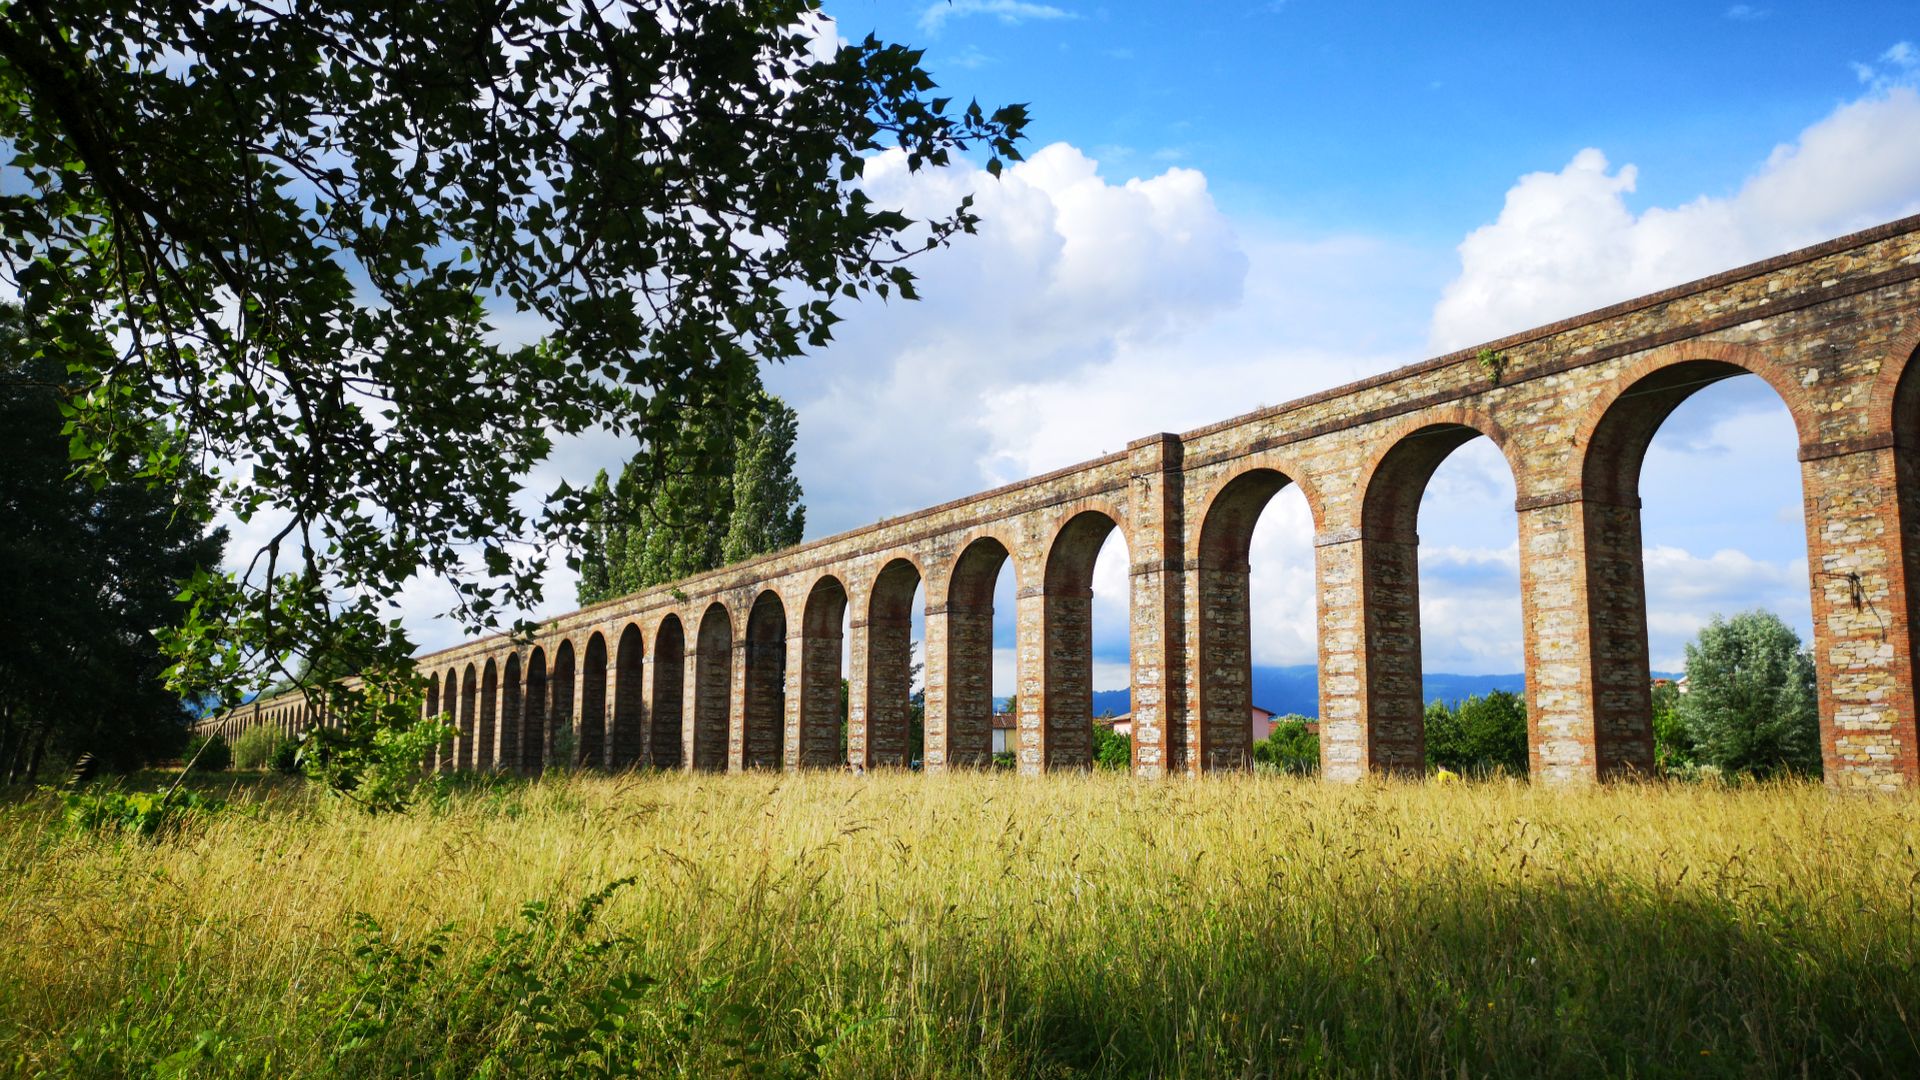 Nottolini aqueduct in the Lucca countryside  